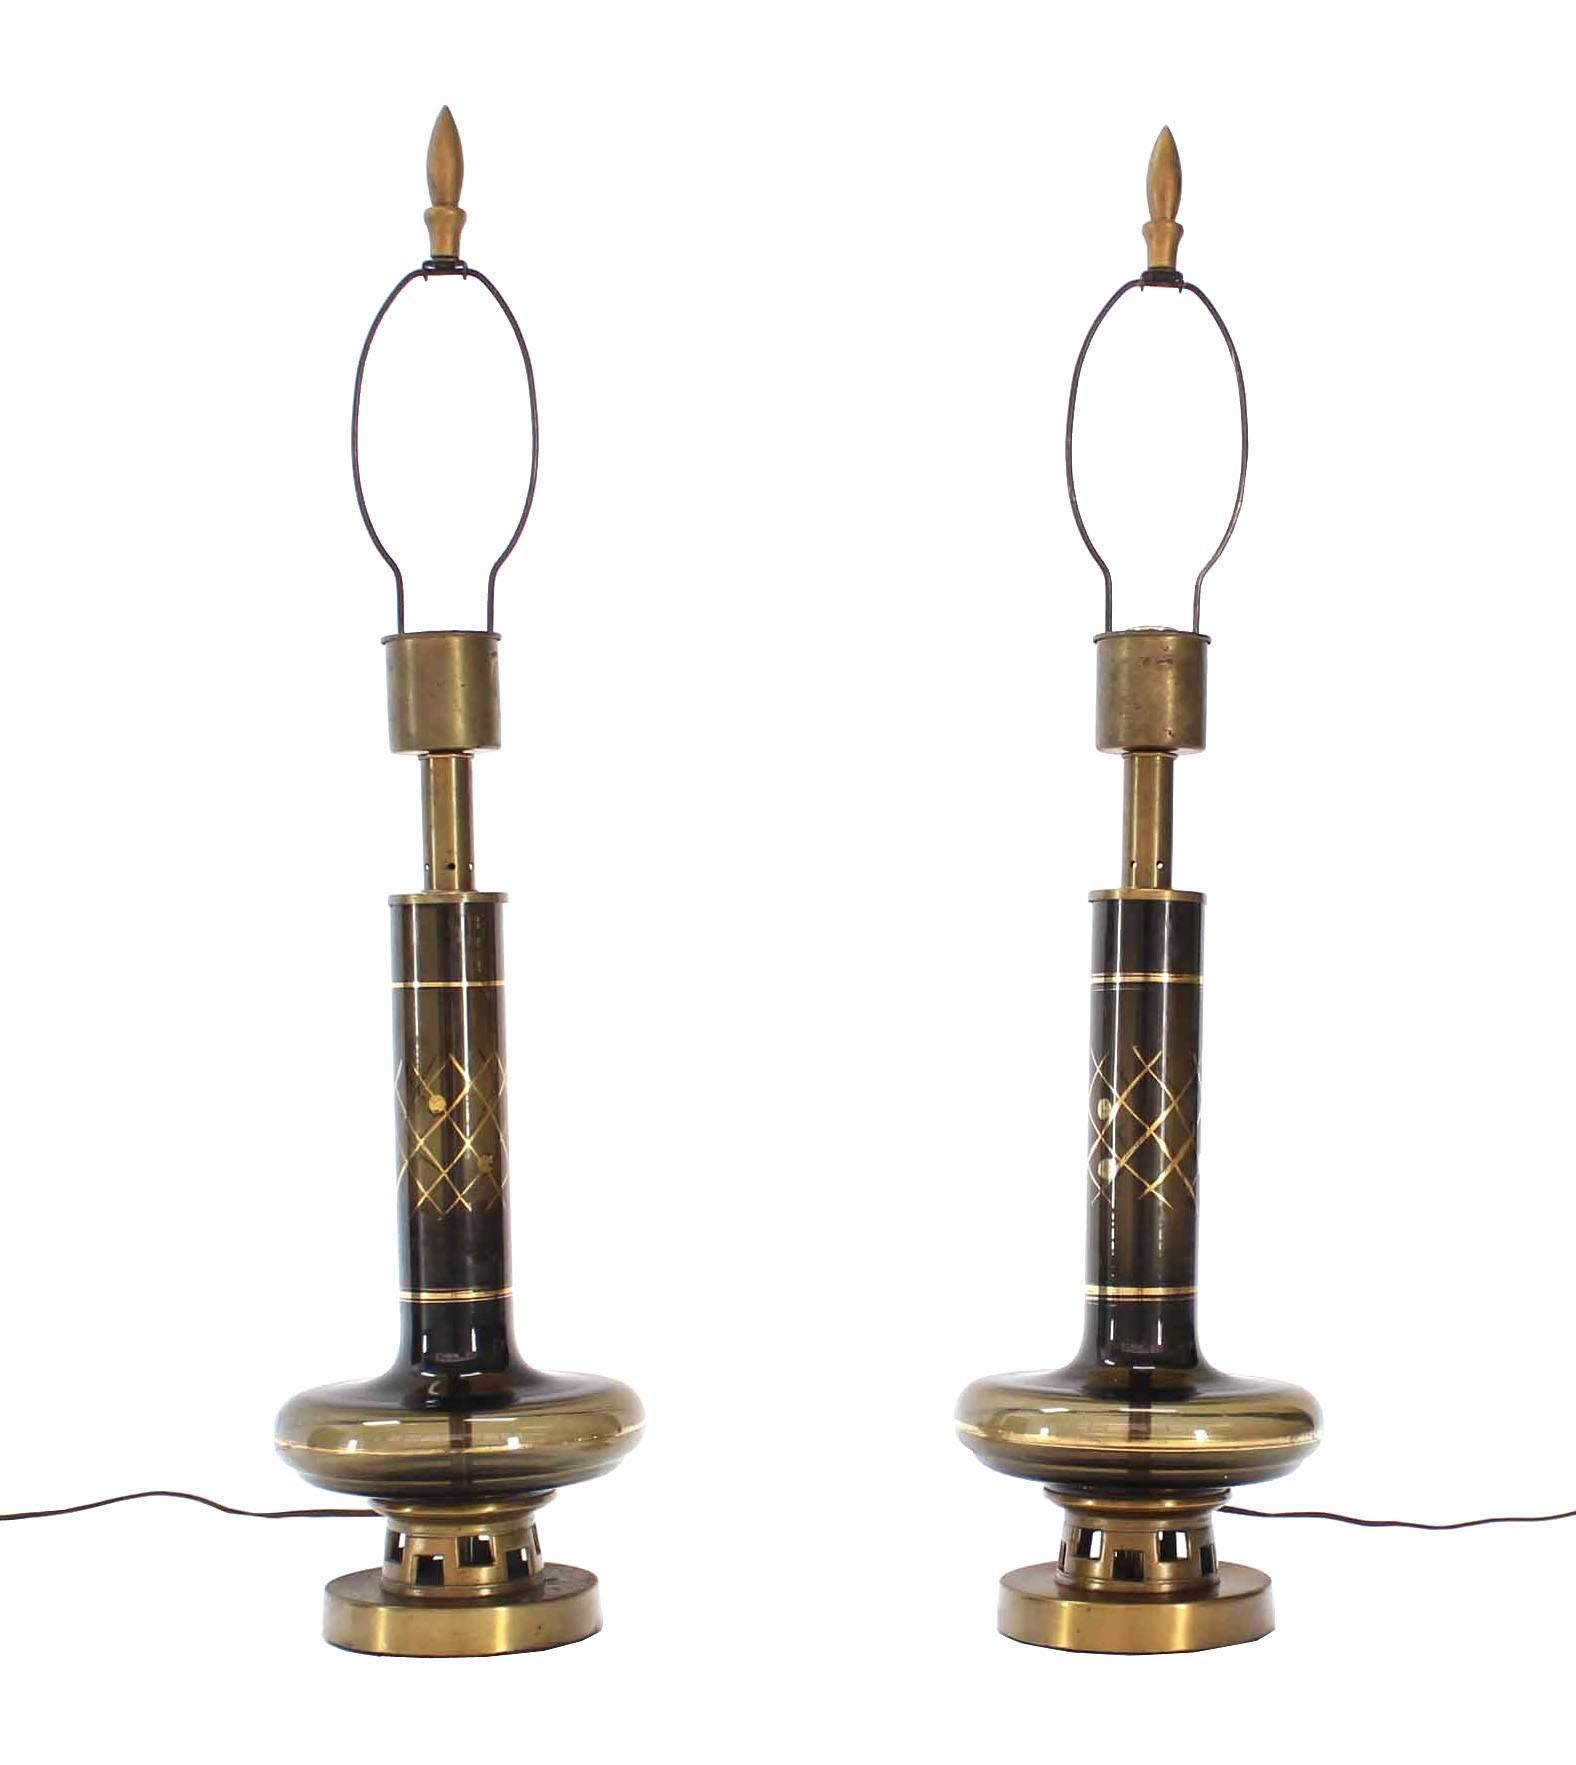 Pair of Gold Decorated Smoked Glass Turned Shape Table Lamps  In Excellent Condition For Sale In Rockaway, NJ